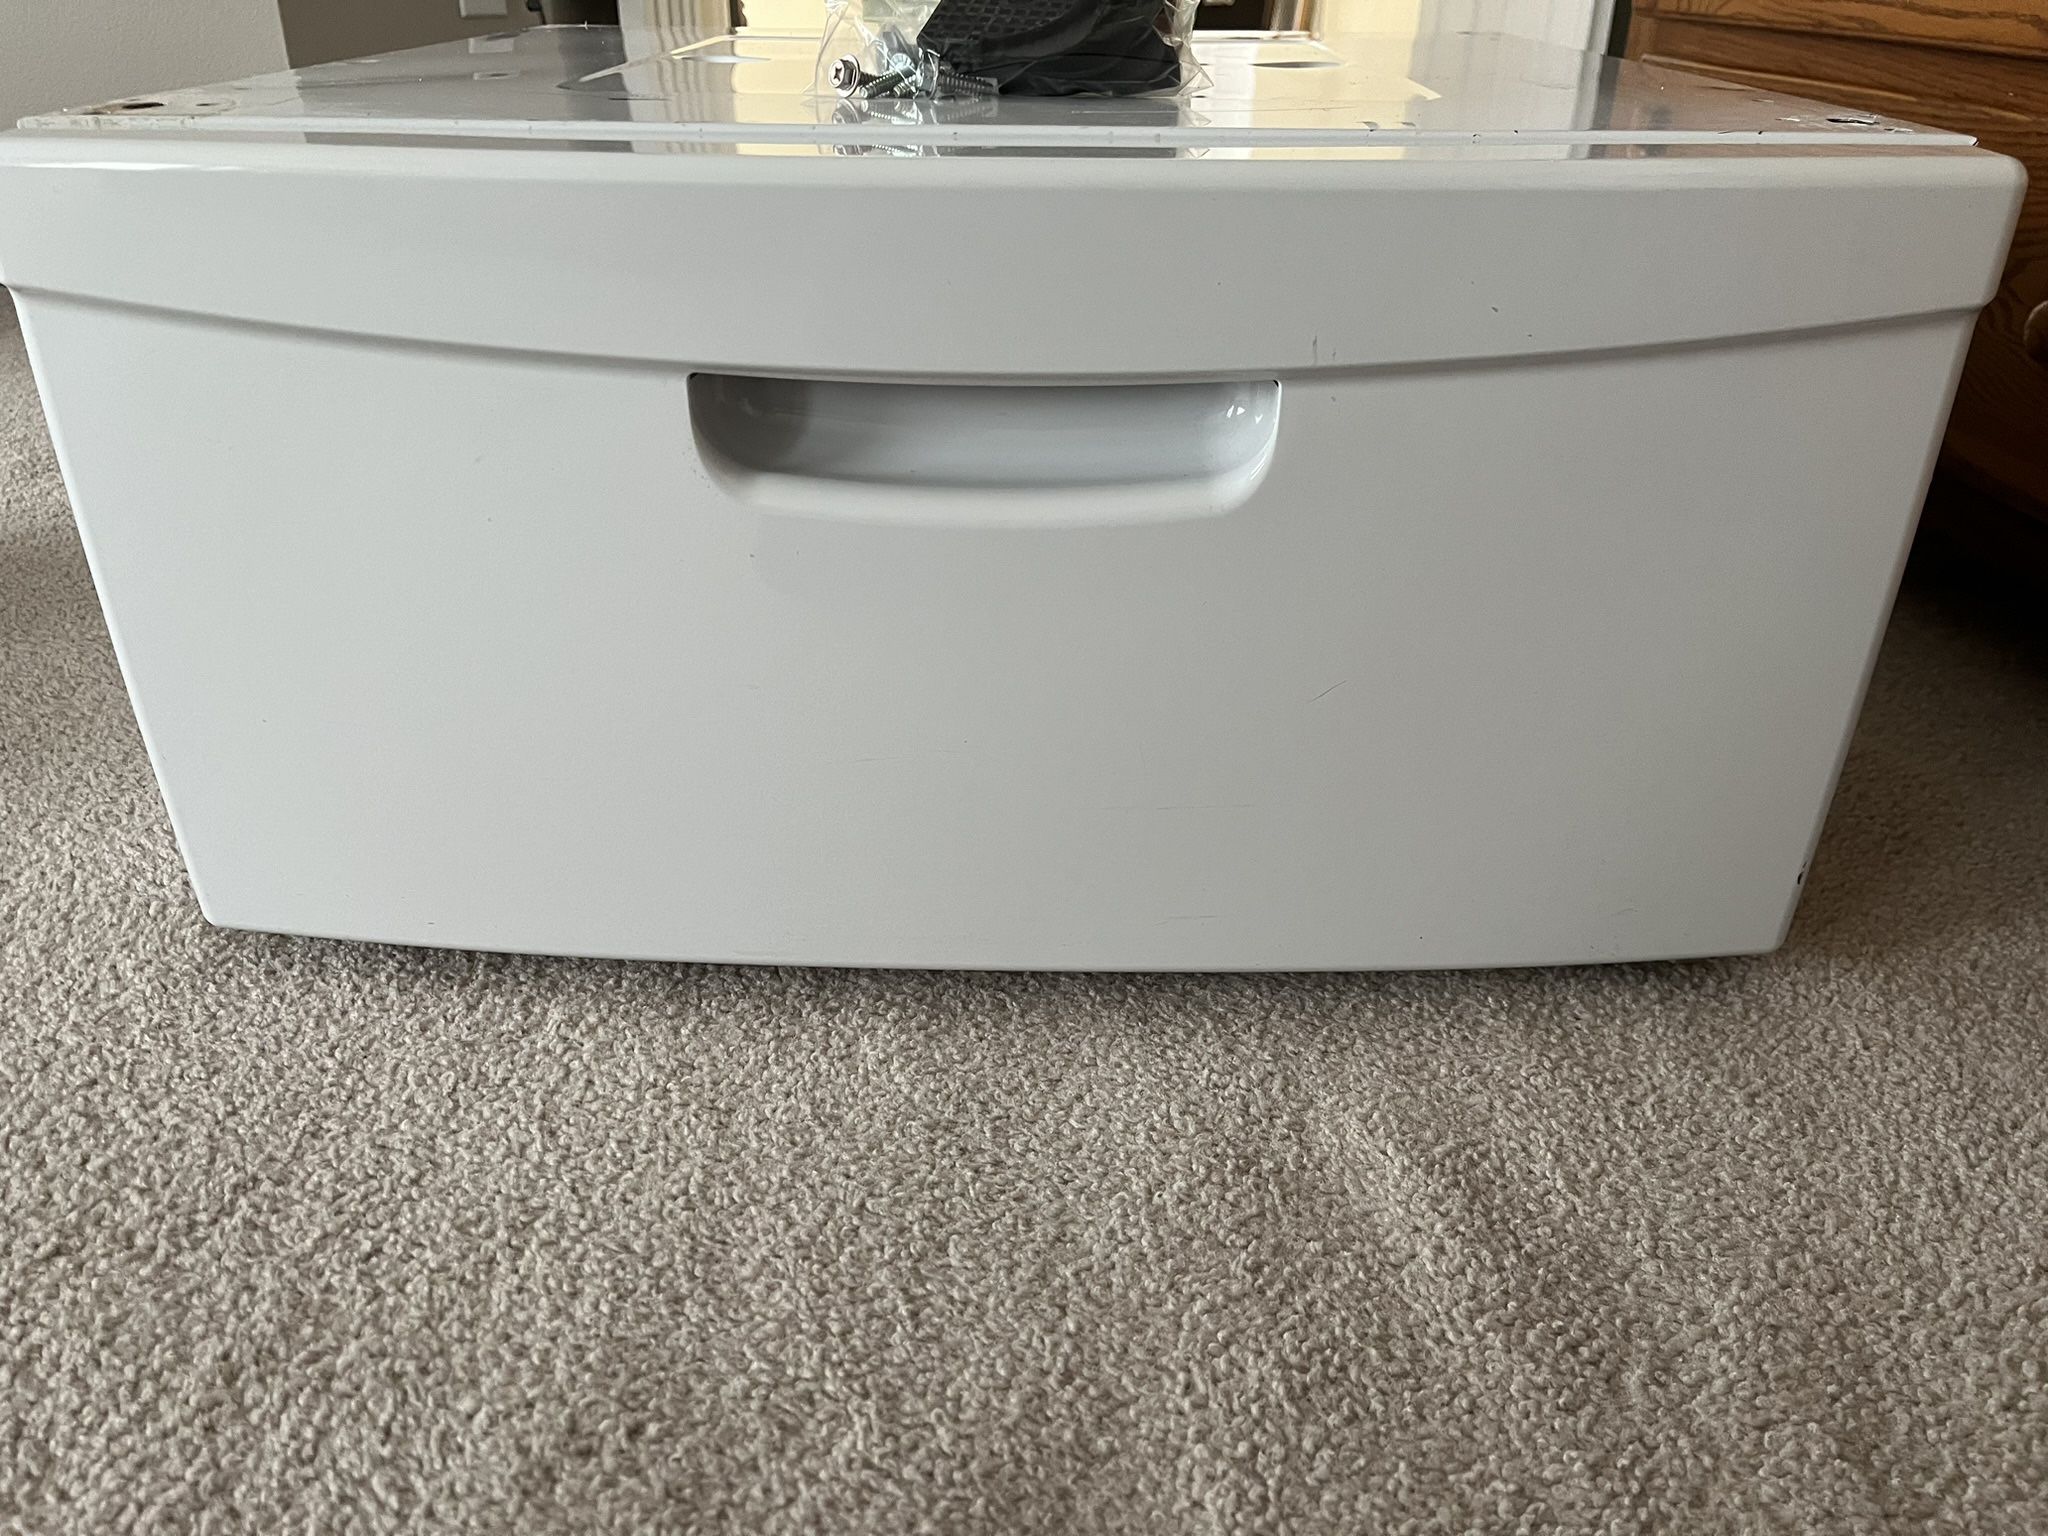 (2) Samsung - 27 in. Laundry Pedestal in White with Storage Drawer for Front Load Washer & Dryer